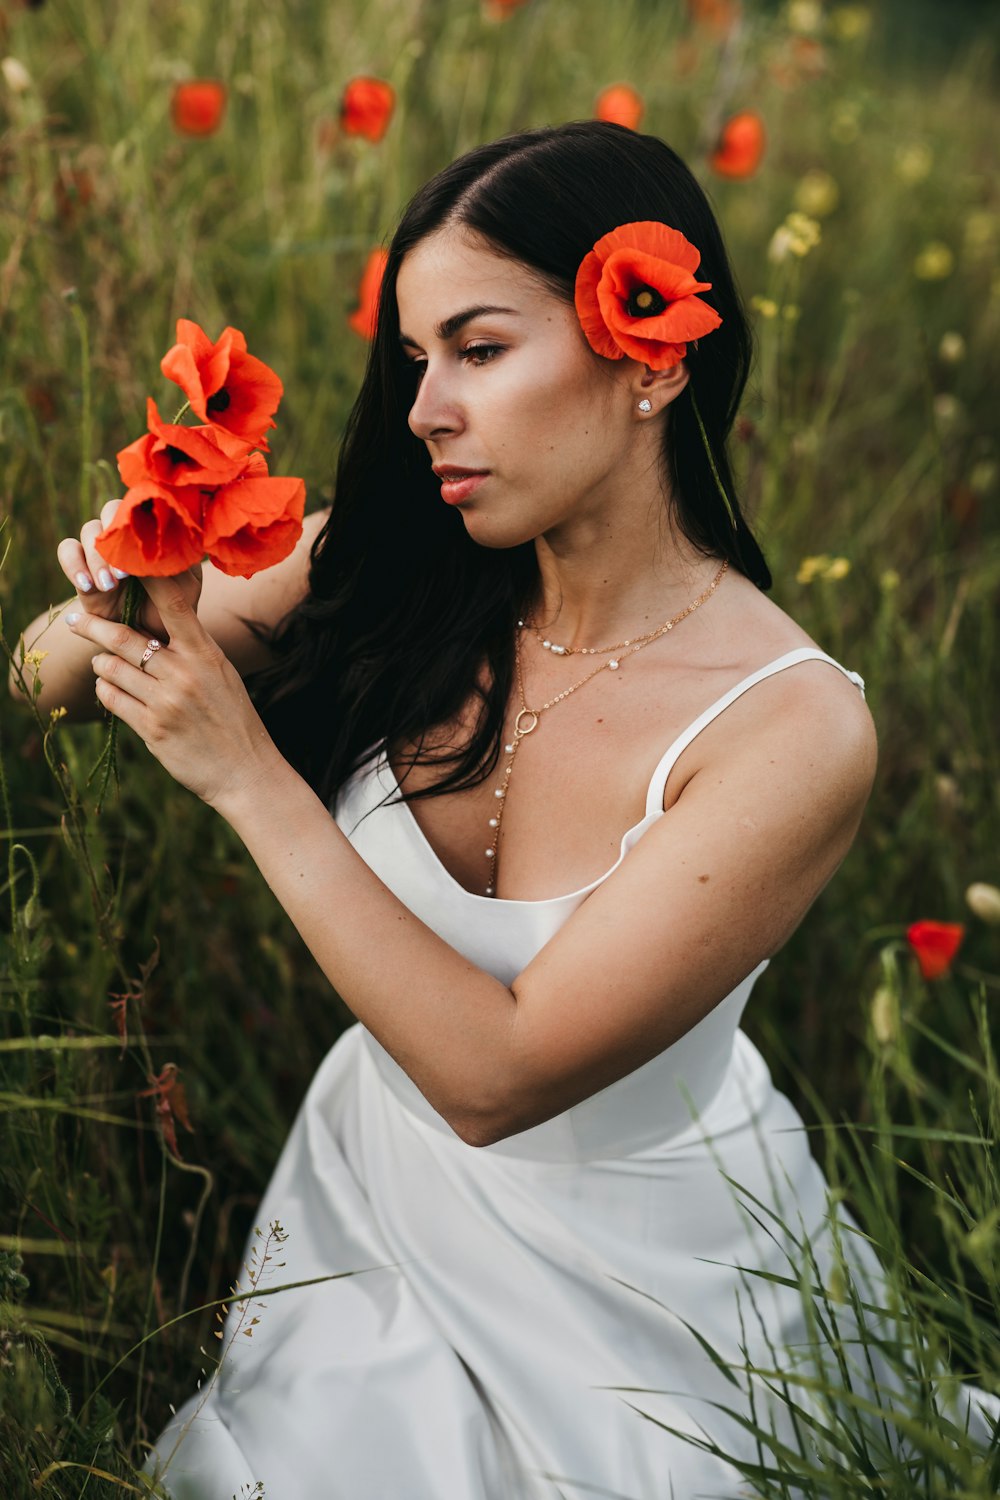 a woman in a white dress holding flowers